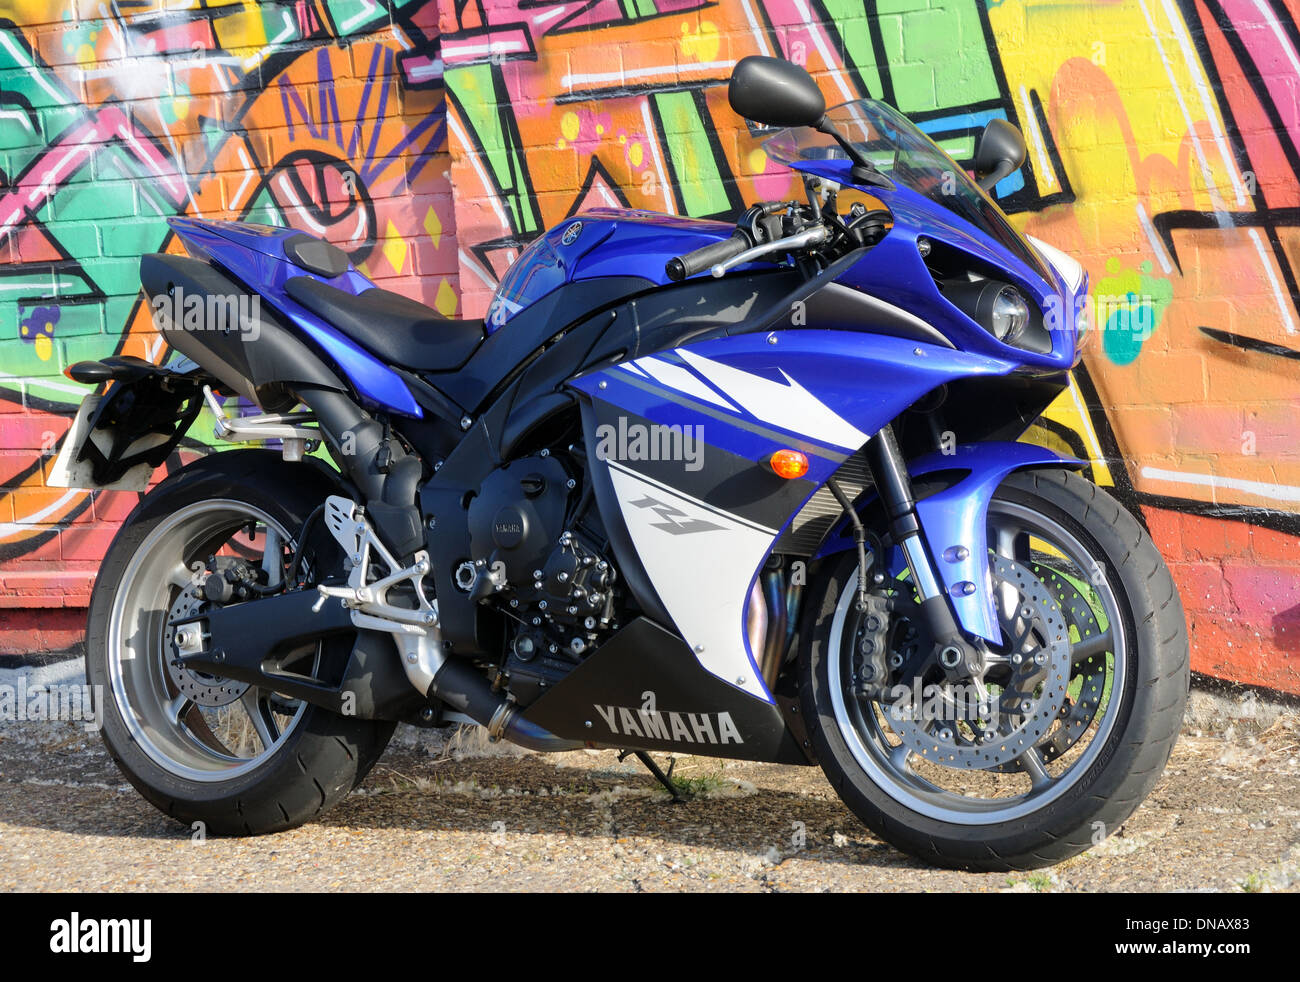 2009 Yamaha YZF-R1 motorcycle Banque D'Images